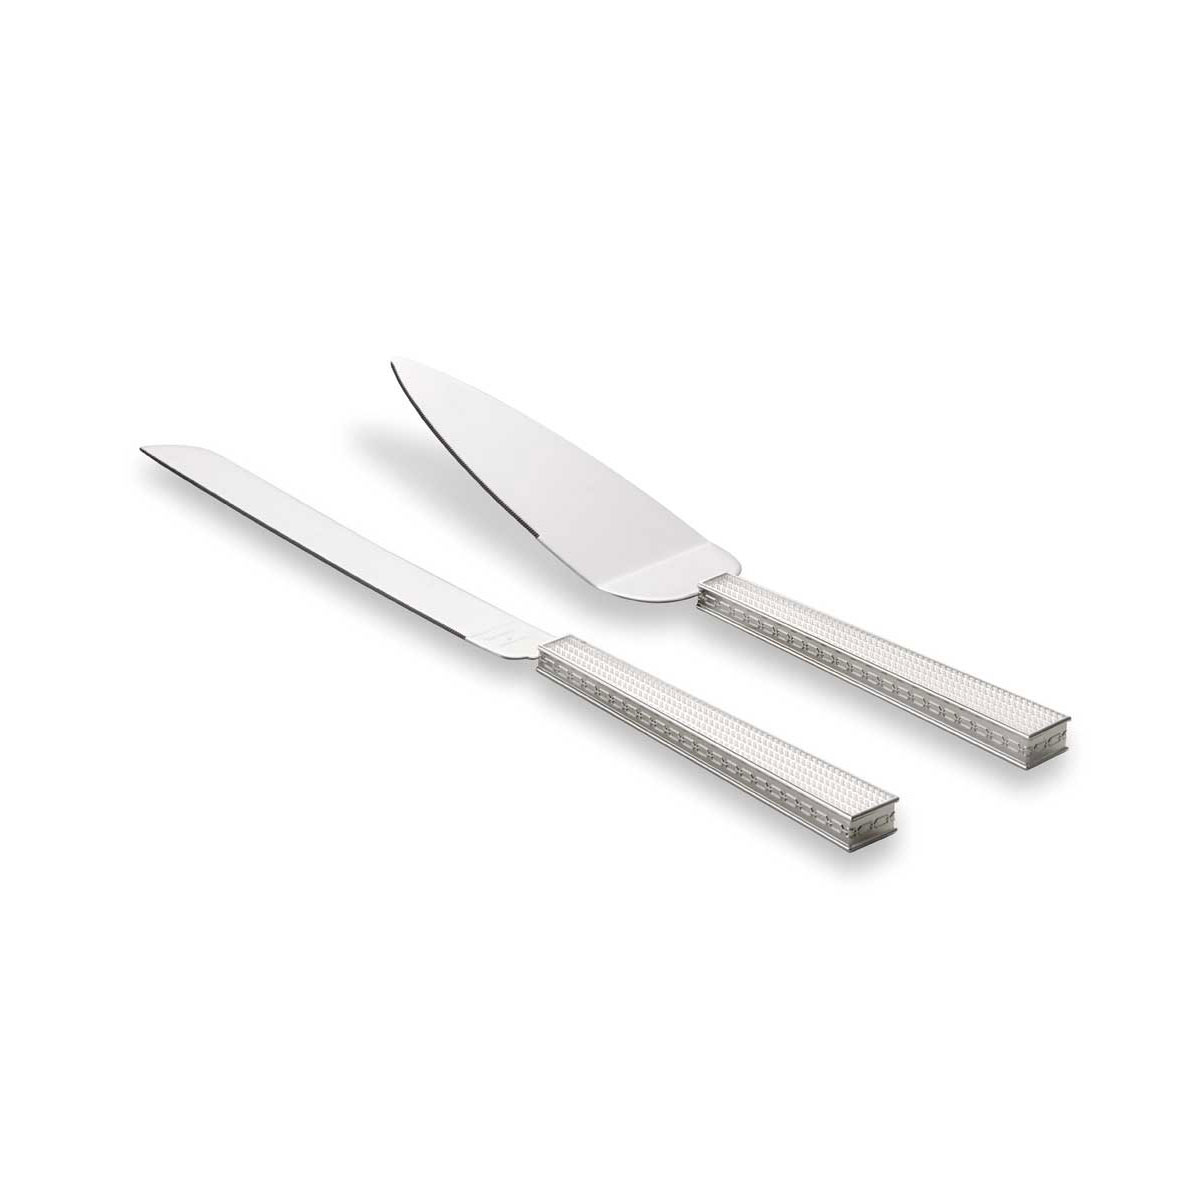 Vera Wang Wedgwood With Love Nouveau Cake Knife and Server Set, Silver